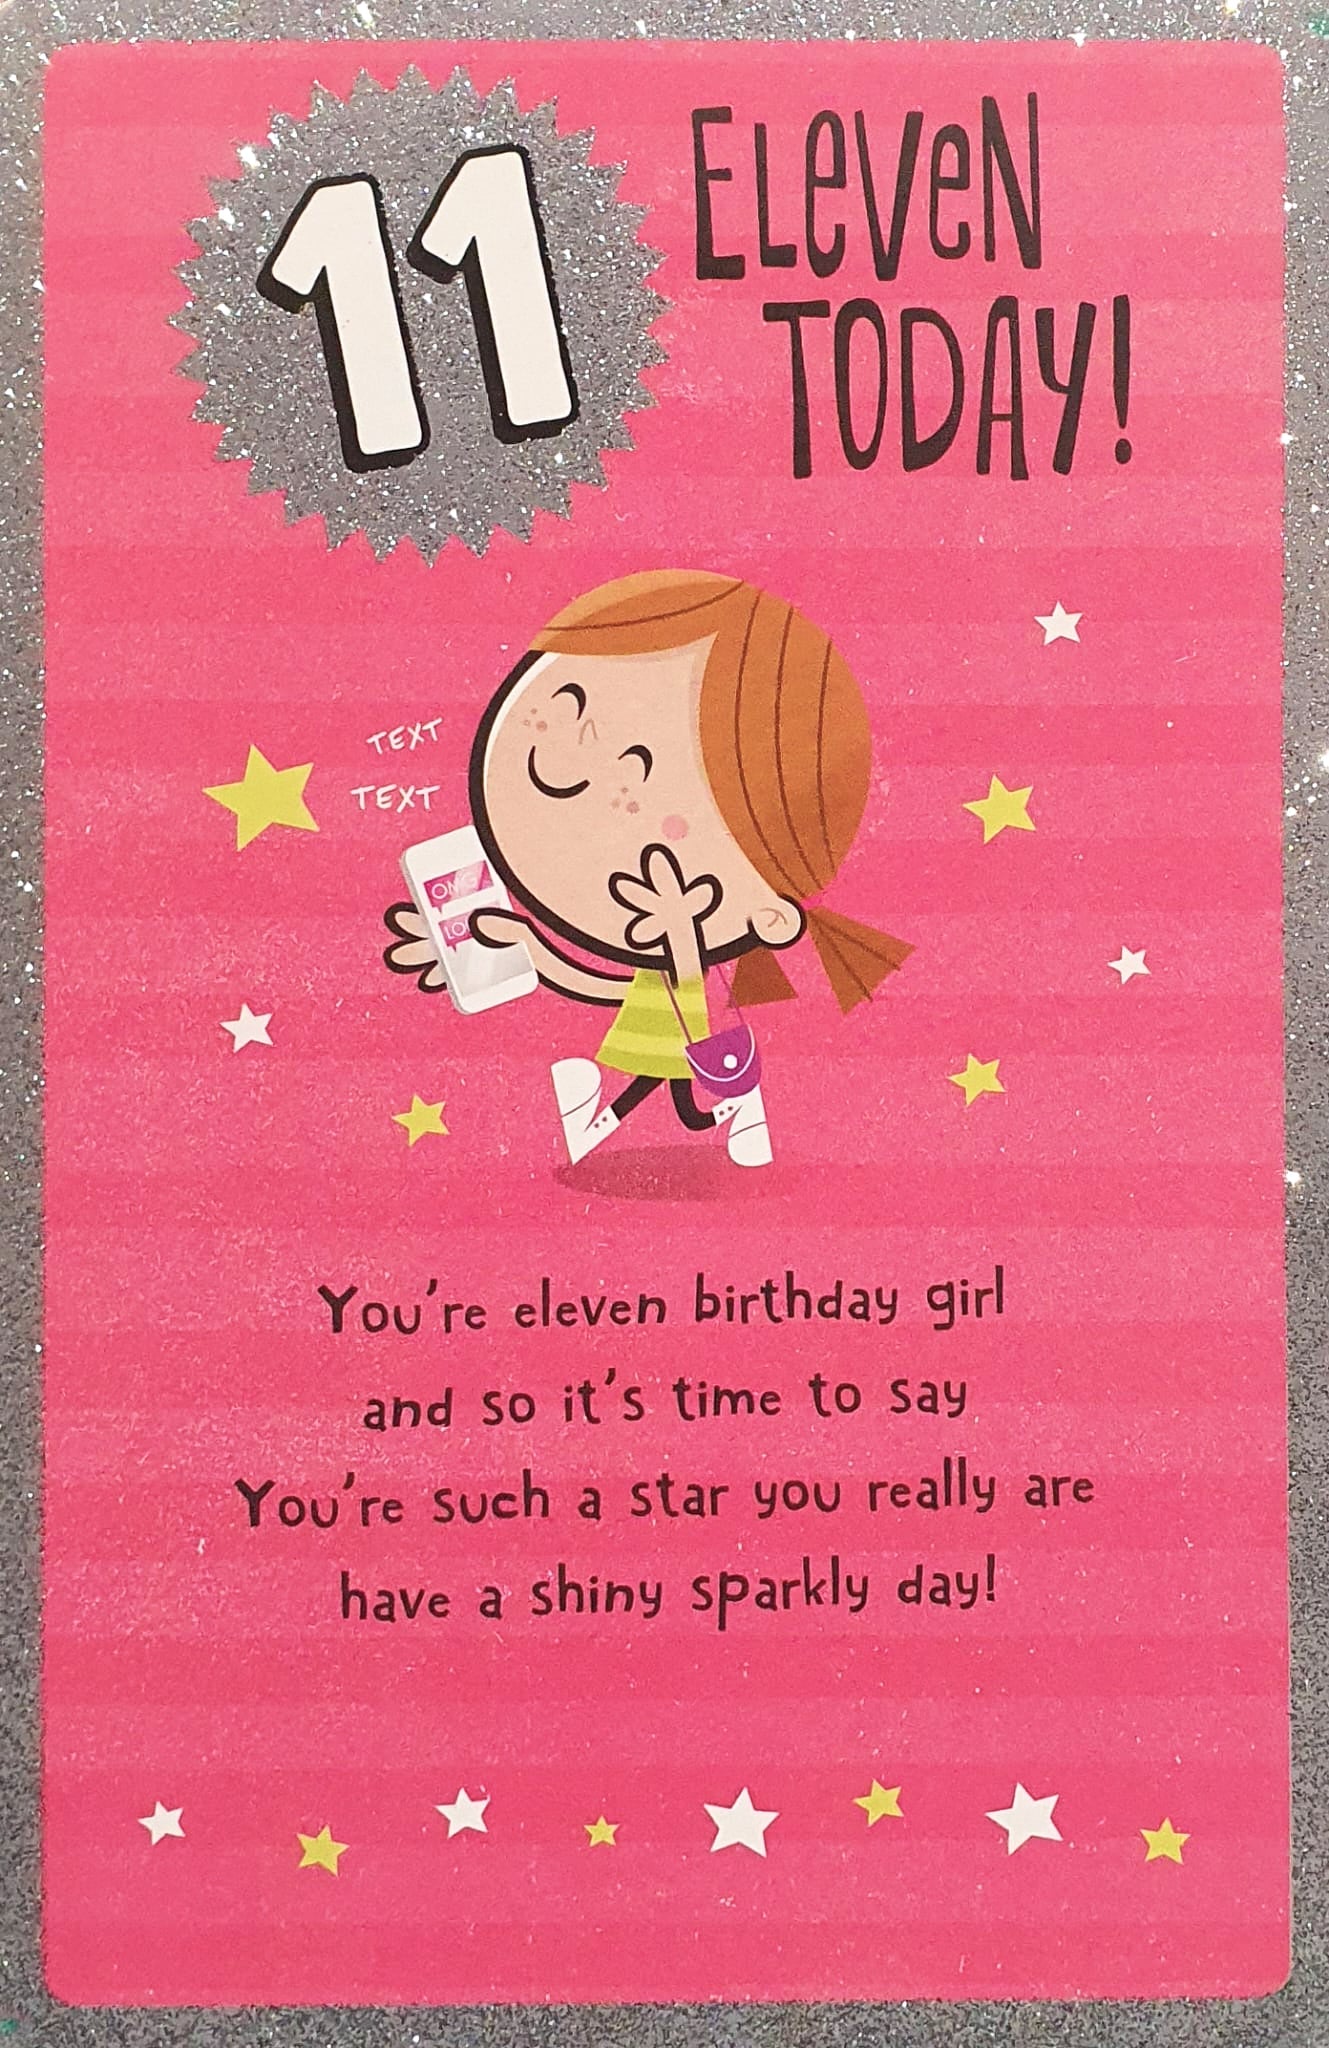 11th Birthday Card - Have A Shiny Sparkly Day Because You Are A Star